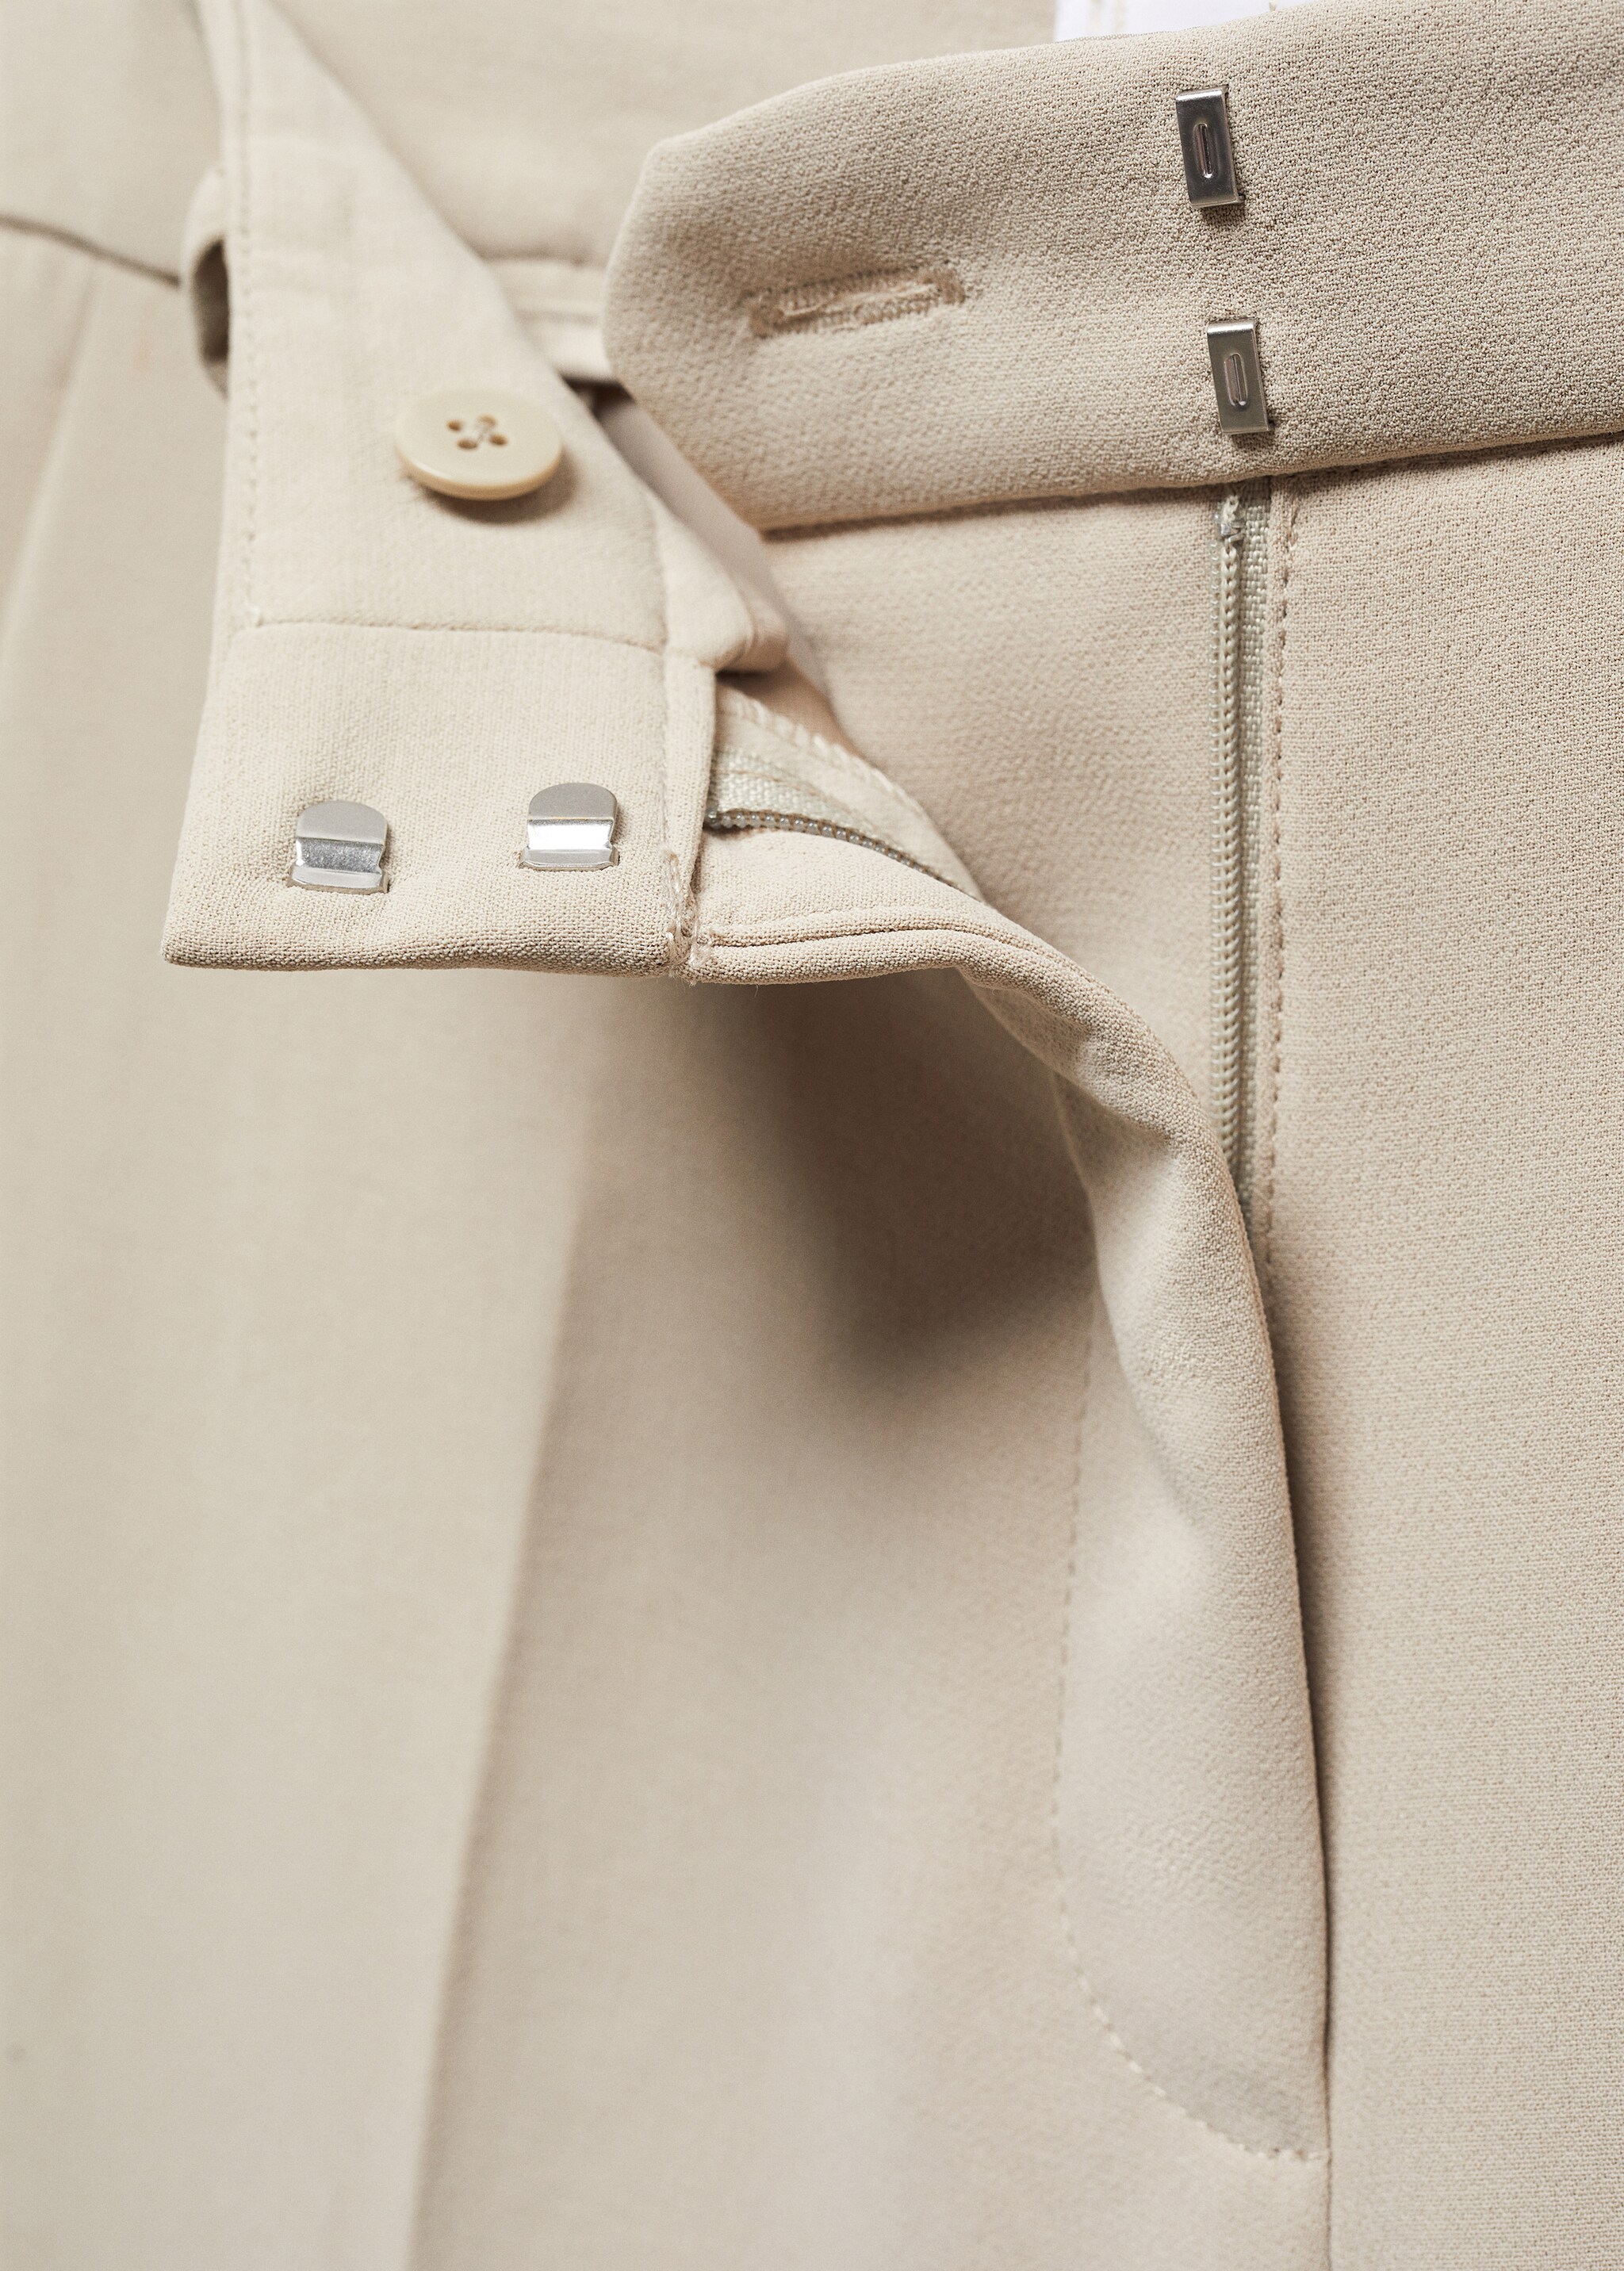 High-rise wideleg trousers - Details of the article 8